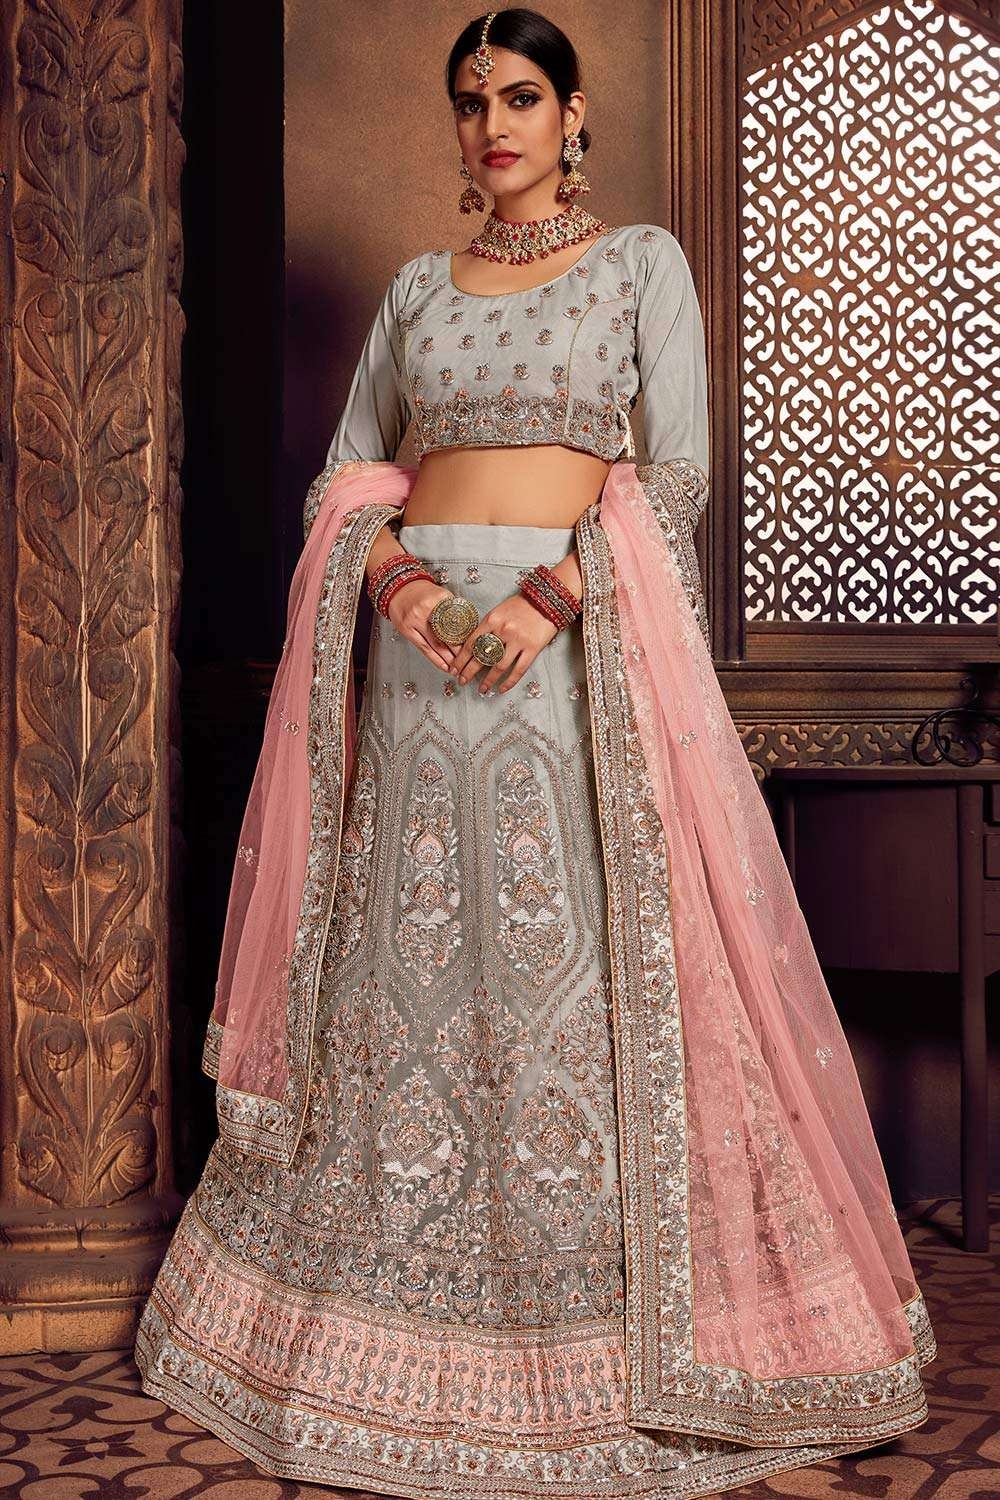 Indian Wedding Saree - Get an incredible look in the net grey lehenga choli  with pink dupatta beautified with thread. . . Price: US$ 89.60 . . Product  code: 1637519 . . . #